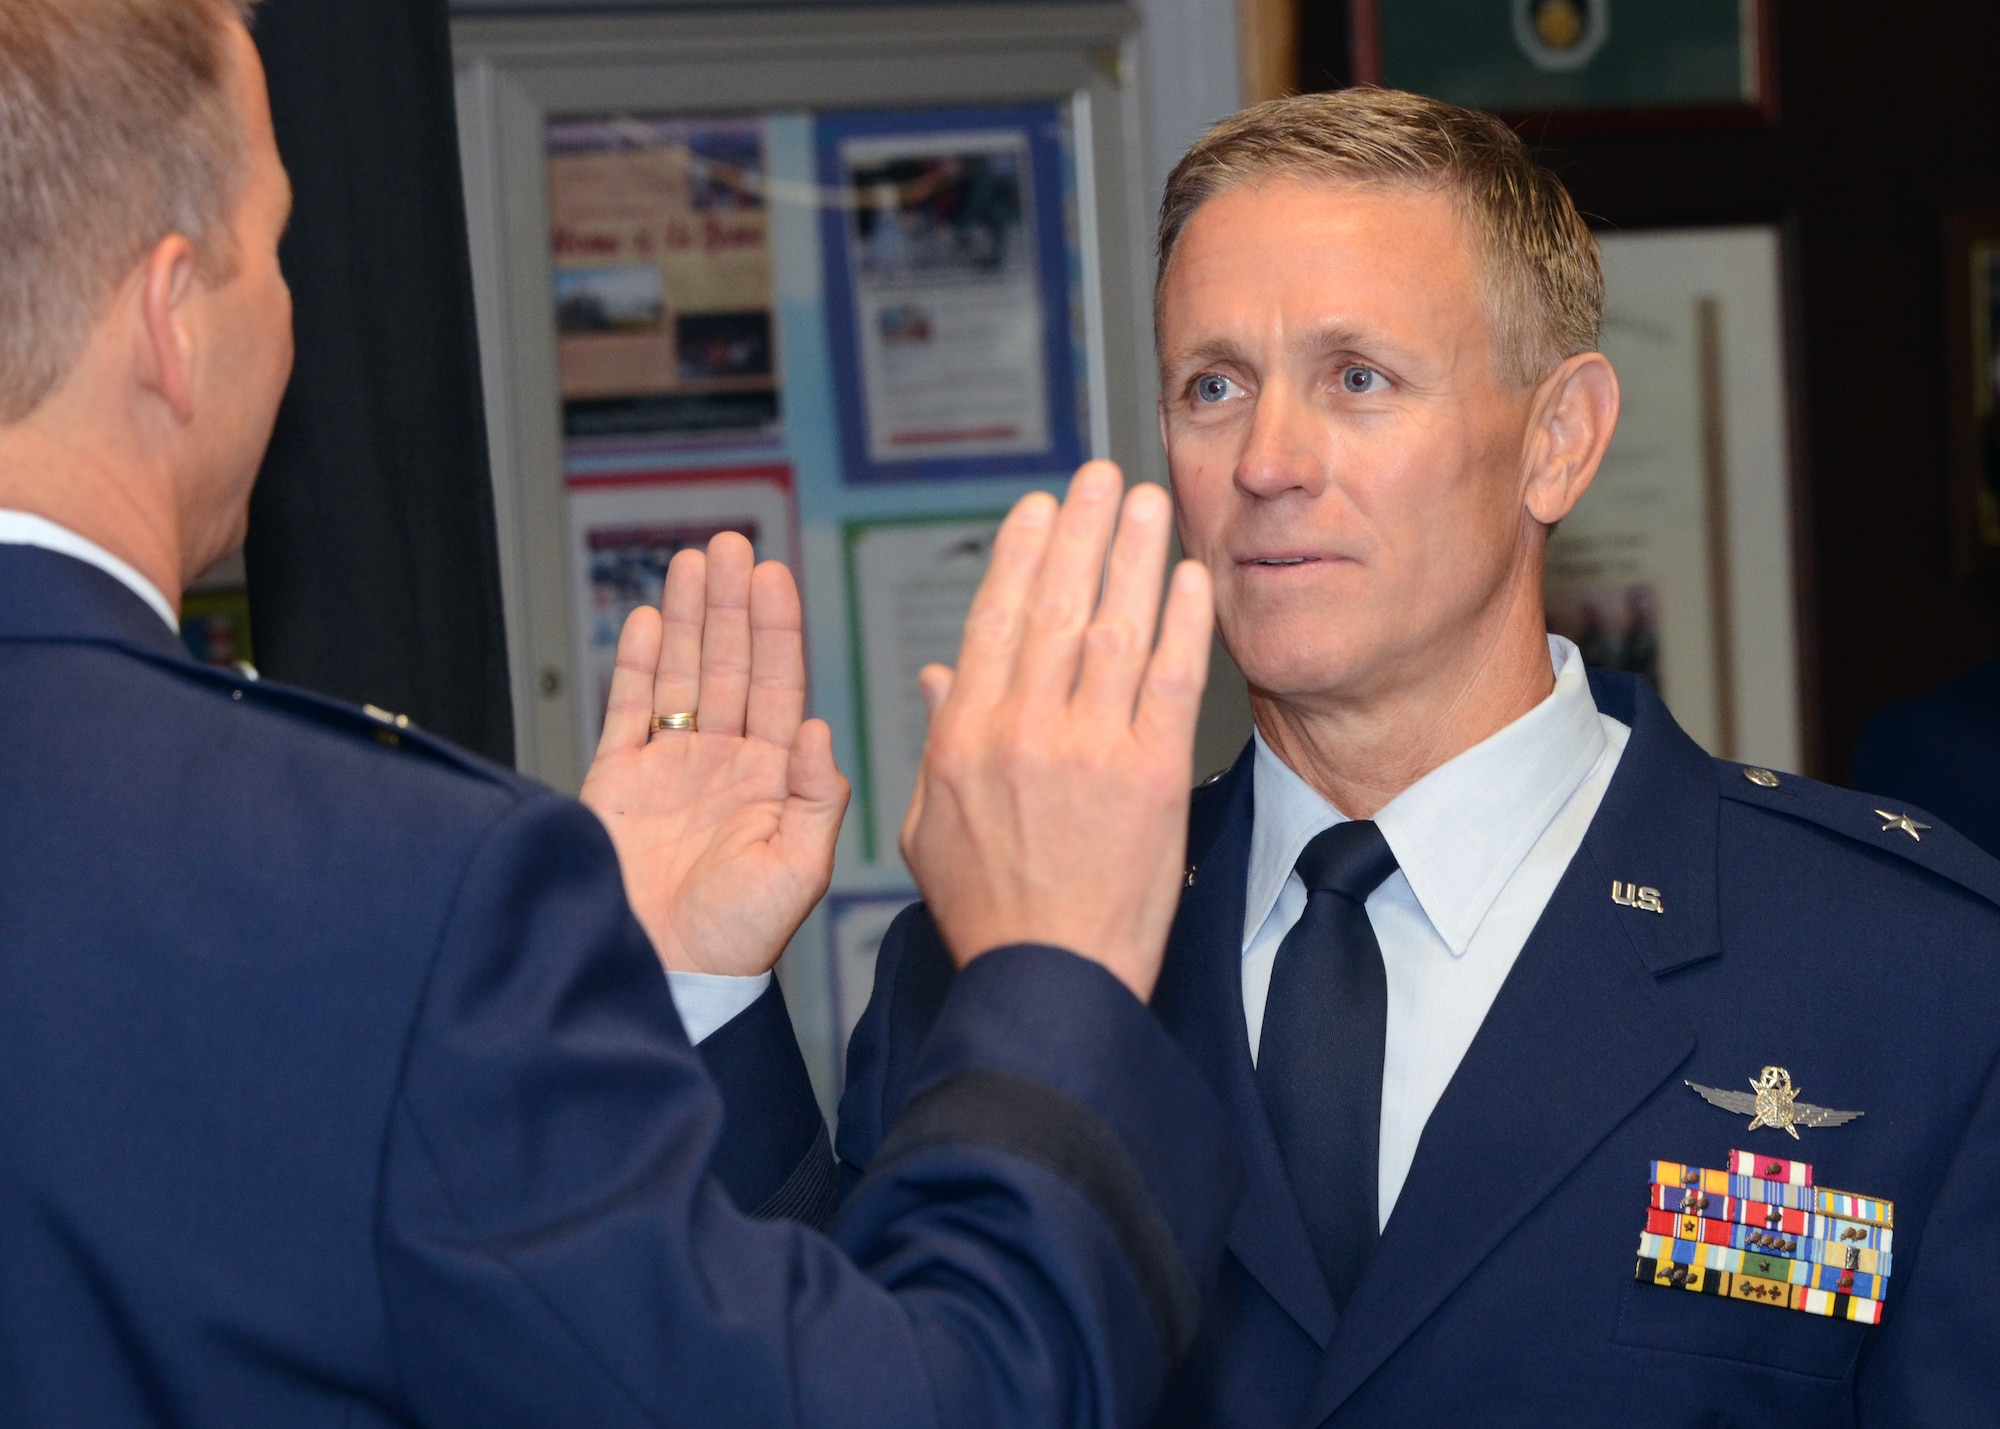 U.S. Air Force Brig. Gen. Paul C. Maas Jr., Chief of Staff, Maryland Air
National Guard, right, recites the Commissioning Oath given by U.S. Air
Force Brig. Gen. Scott Kelly, 175th Wing Commander, during a promotion
ceremony at Warfield Air National Guard Base, Baltimore, Md., on July 20,
2012.  Maas who was promoted to Brigadier General was joined by family and
friends. (National Guard photo by Staff Sgt. Benjamin Hughes)
